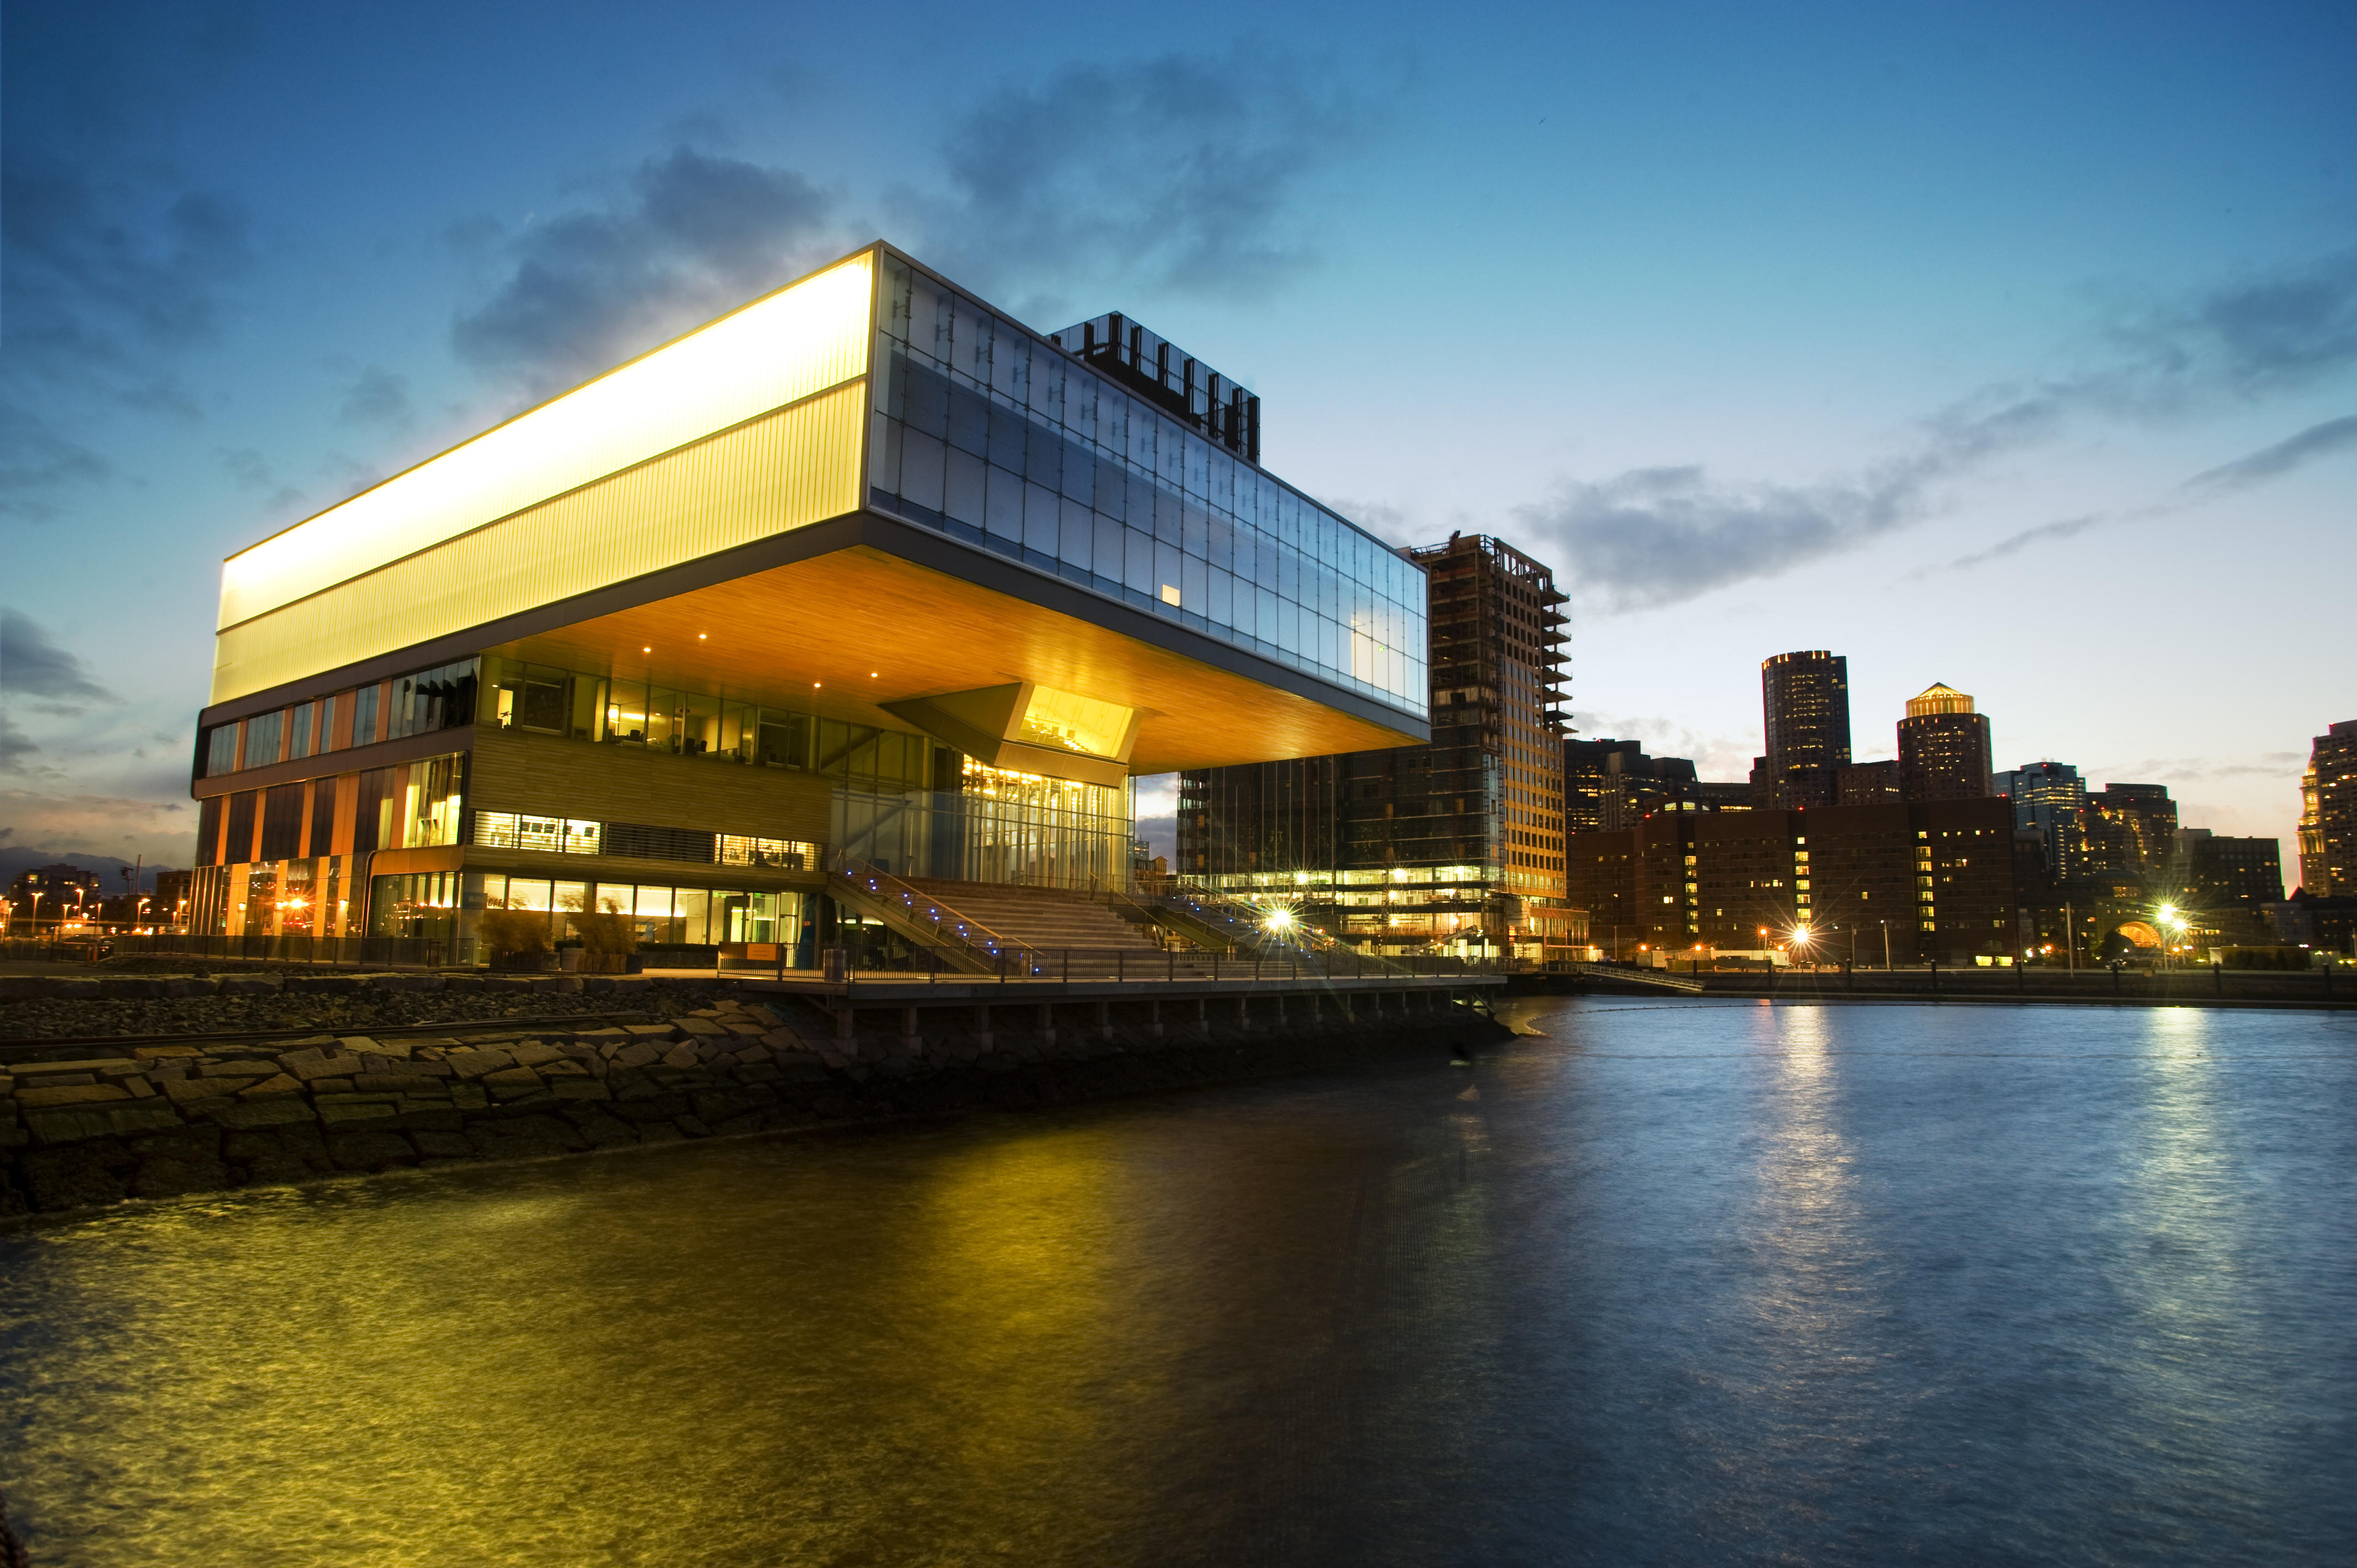 An evening view of the Institute of Contemporary Art in Boston.